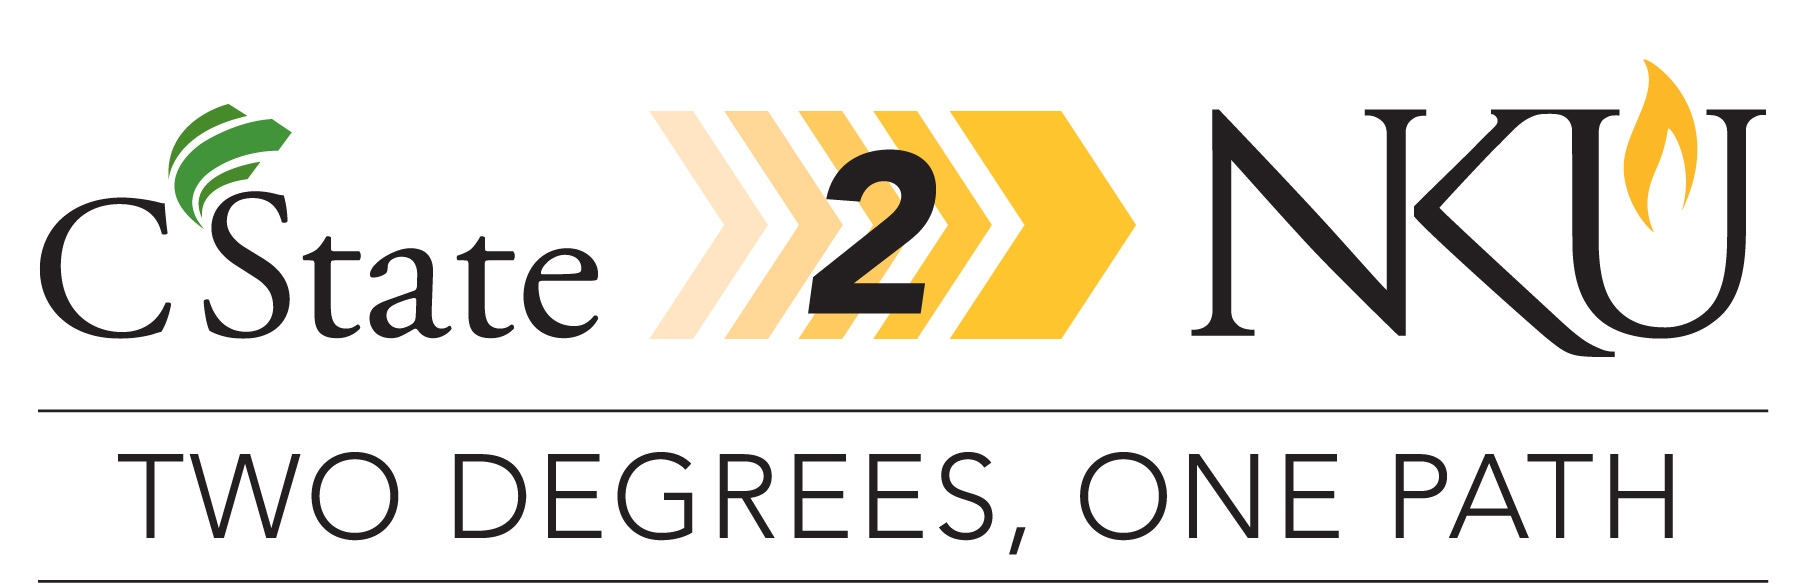 CState2NKU - two degrees, one path